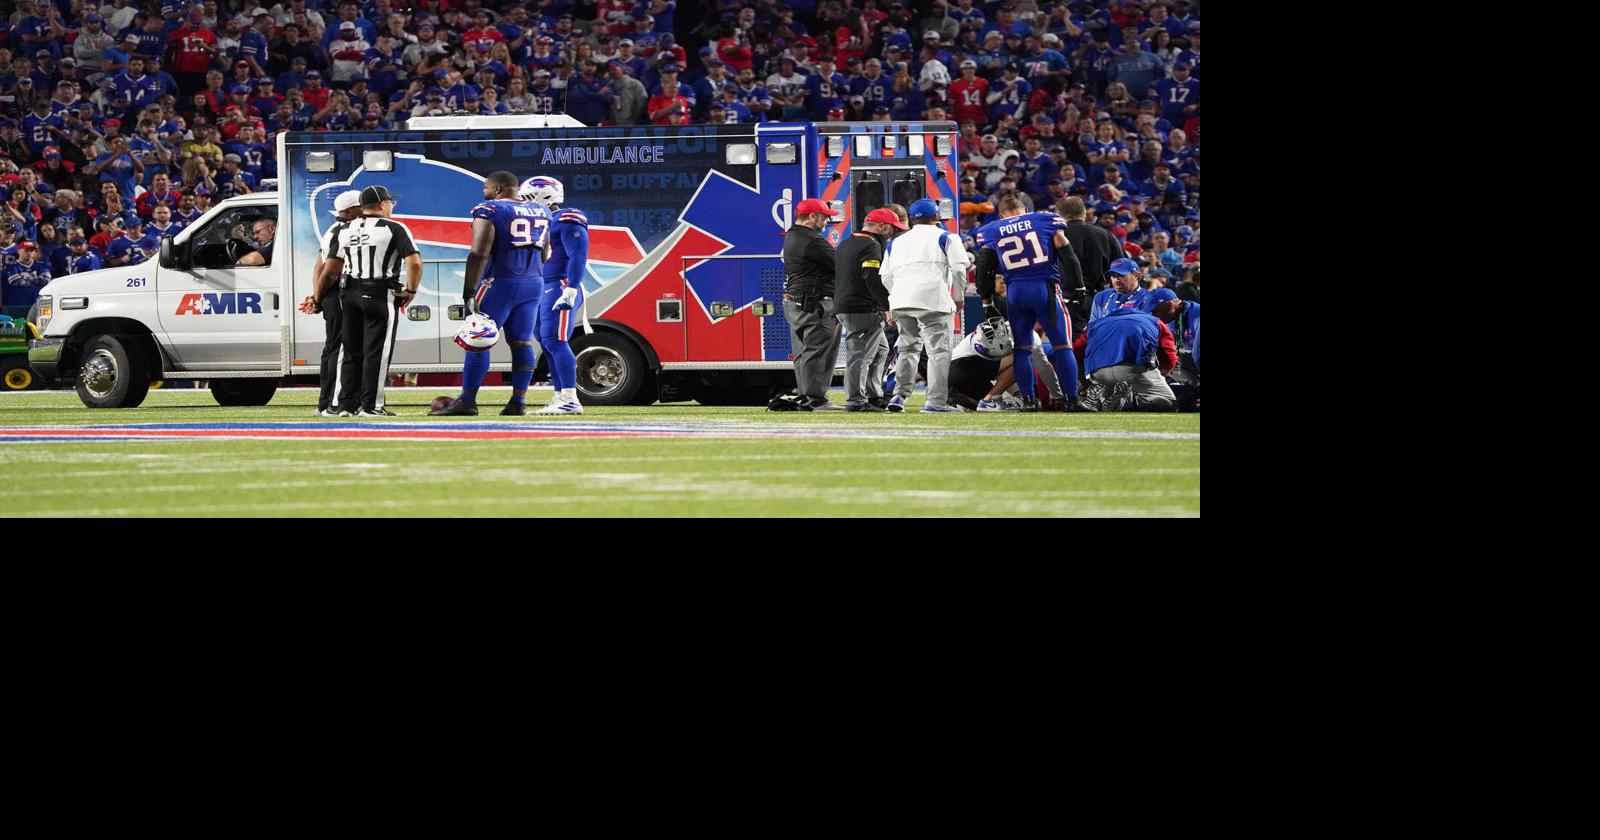 It's a deep hit': Bills express concern after scary injury to Dane